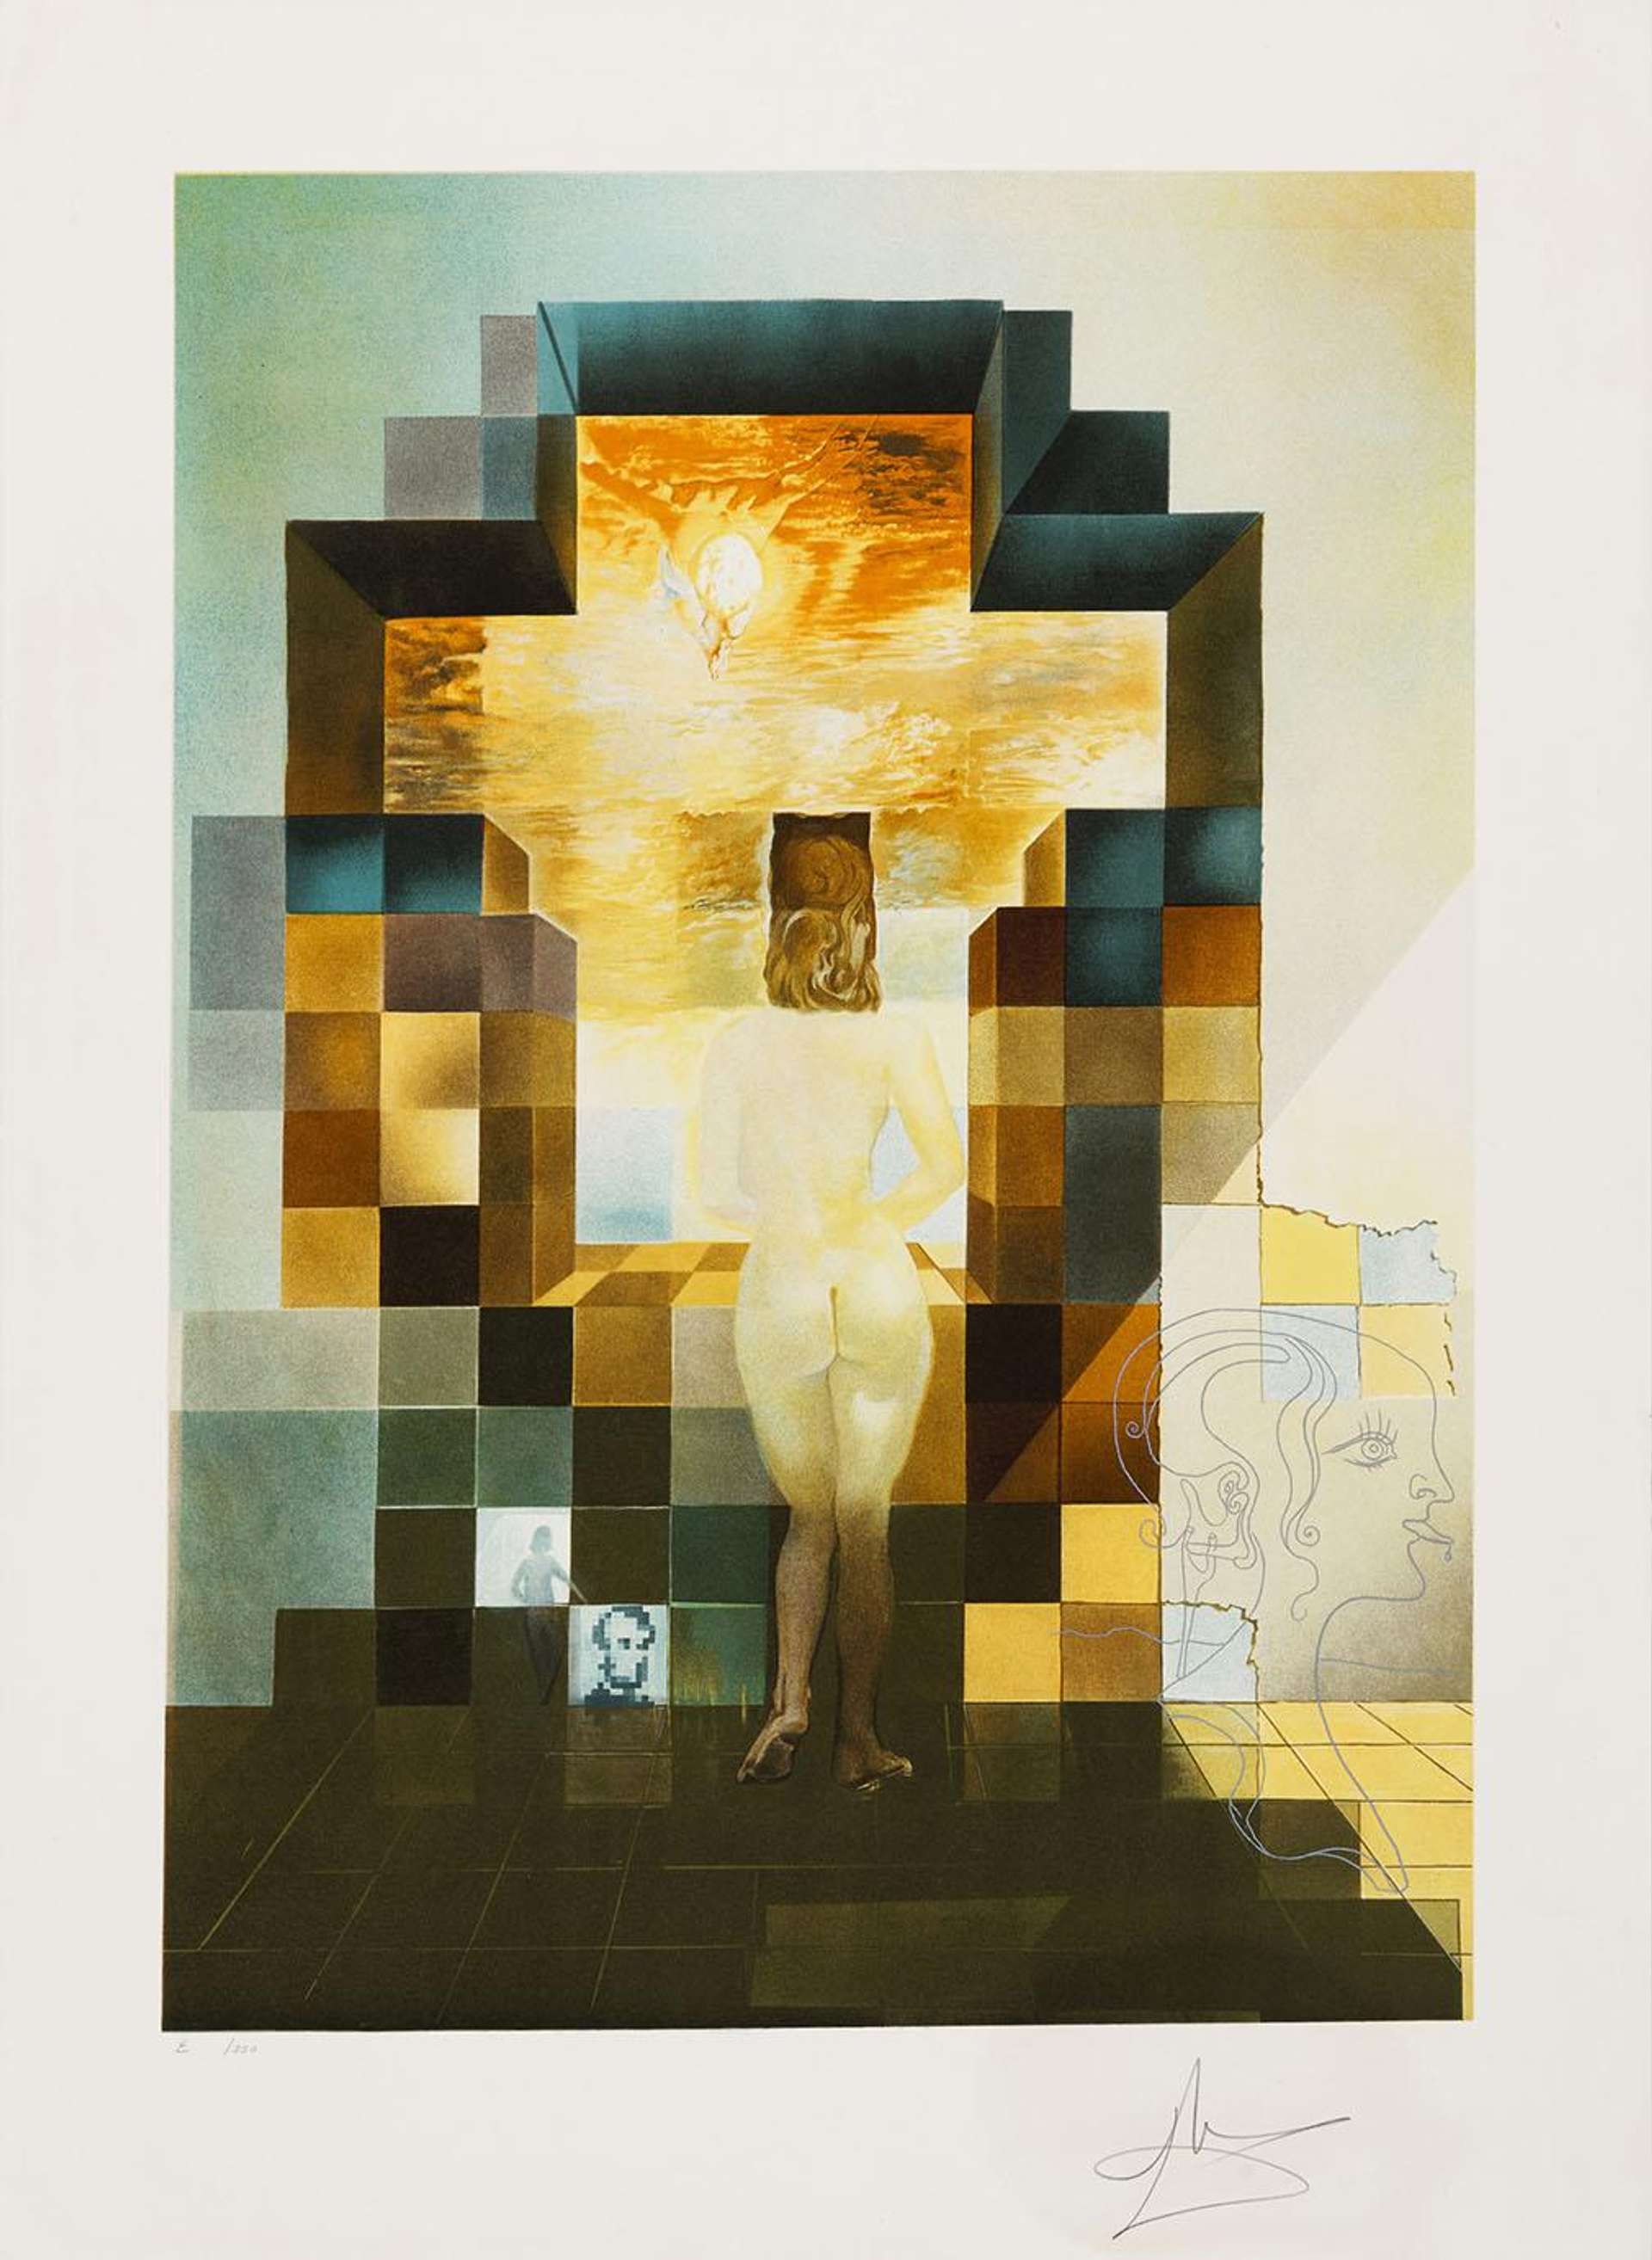 Salvador Dali’s Lincoln In Dalivision, a Surrealist style painting of a distorted image of Abraham Lincoln through a nude woman looking into a different dimension between herself and multi-colored tiles.